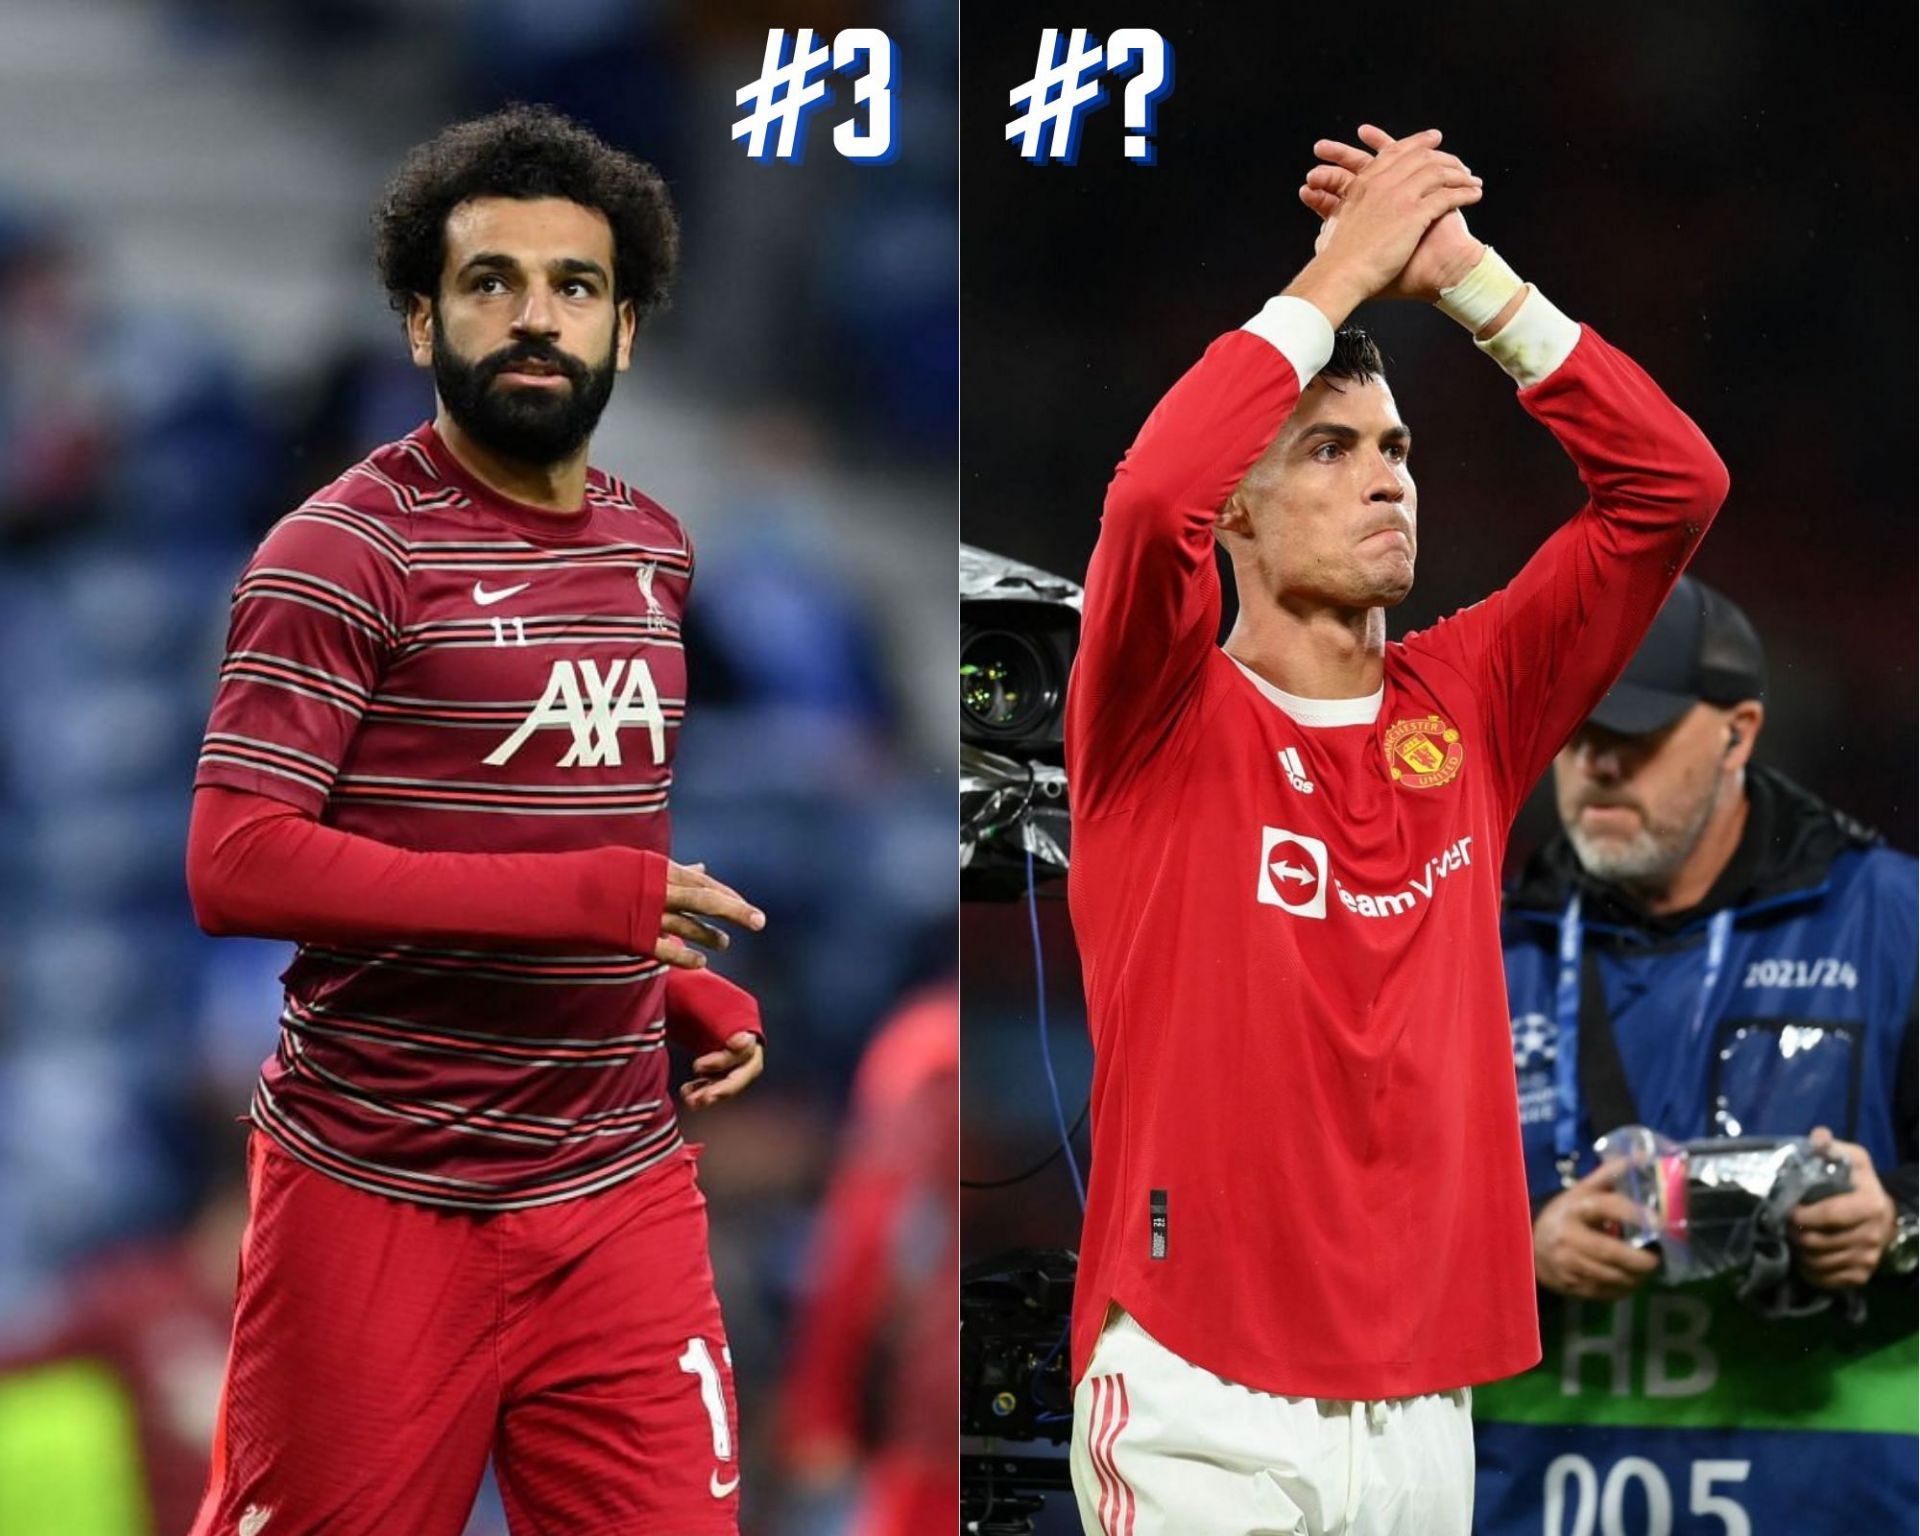 Top 5 Premier League players with the most shots per game this season